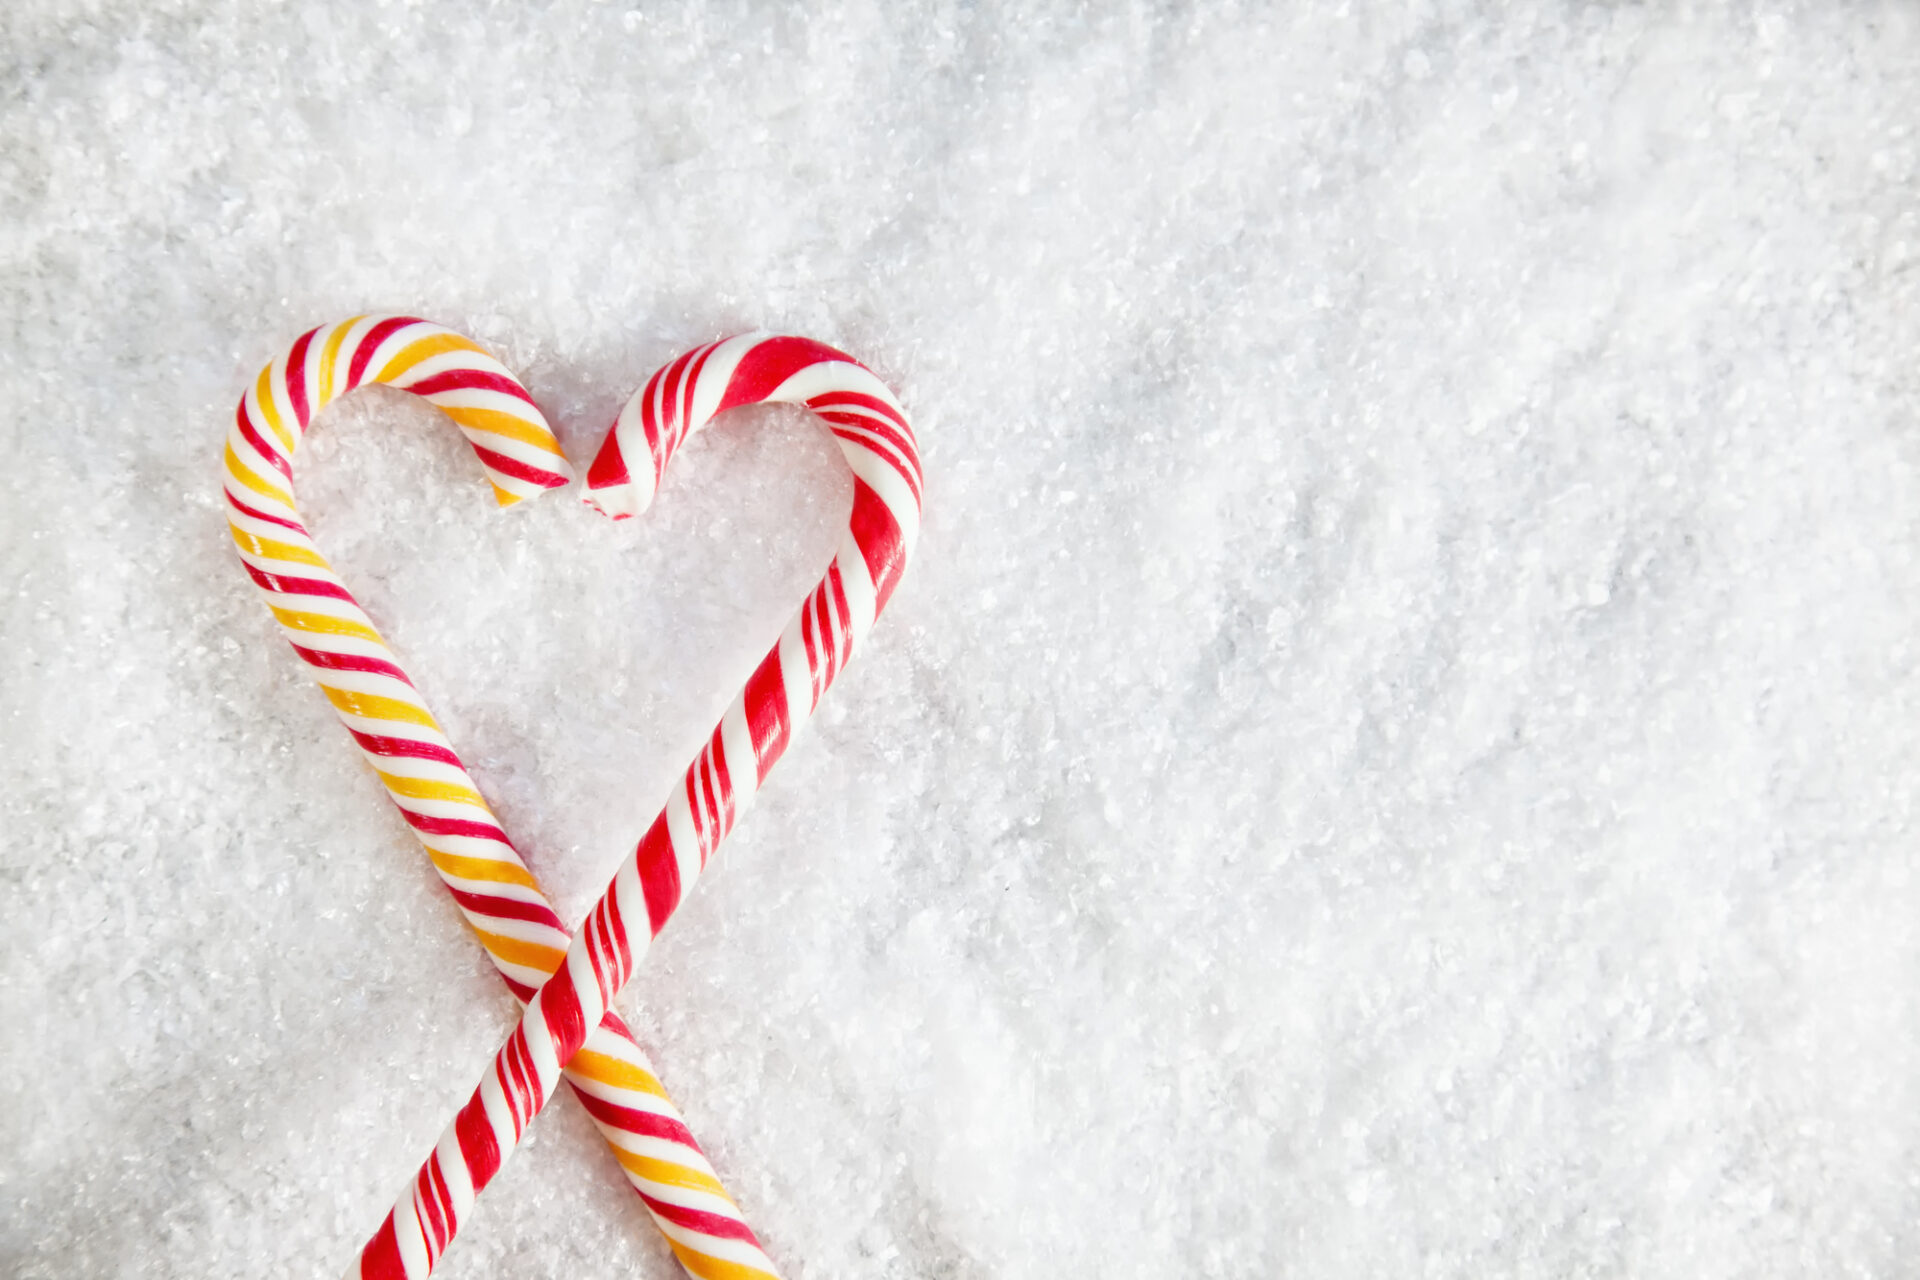 Two Candy Canes On Snowy Background Shaped Like a Heart